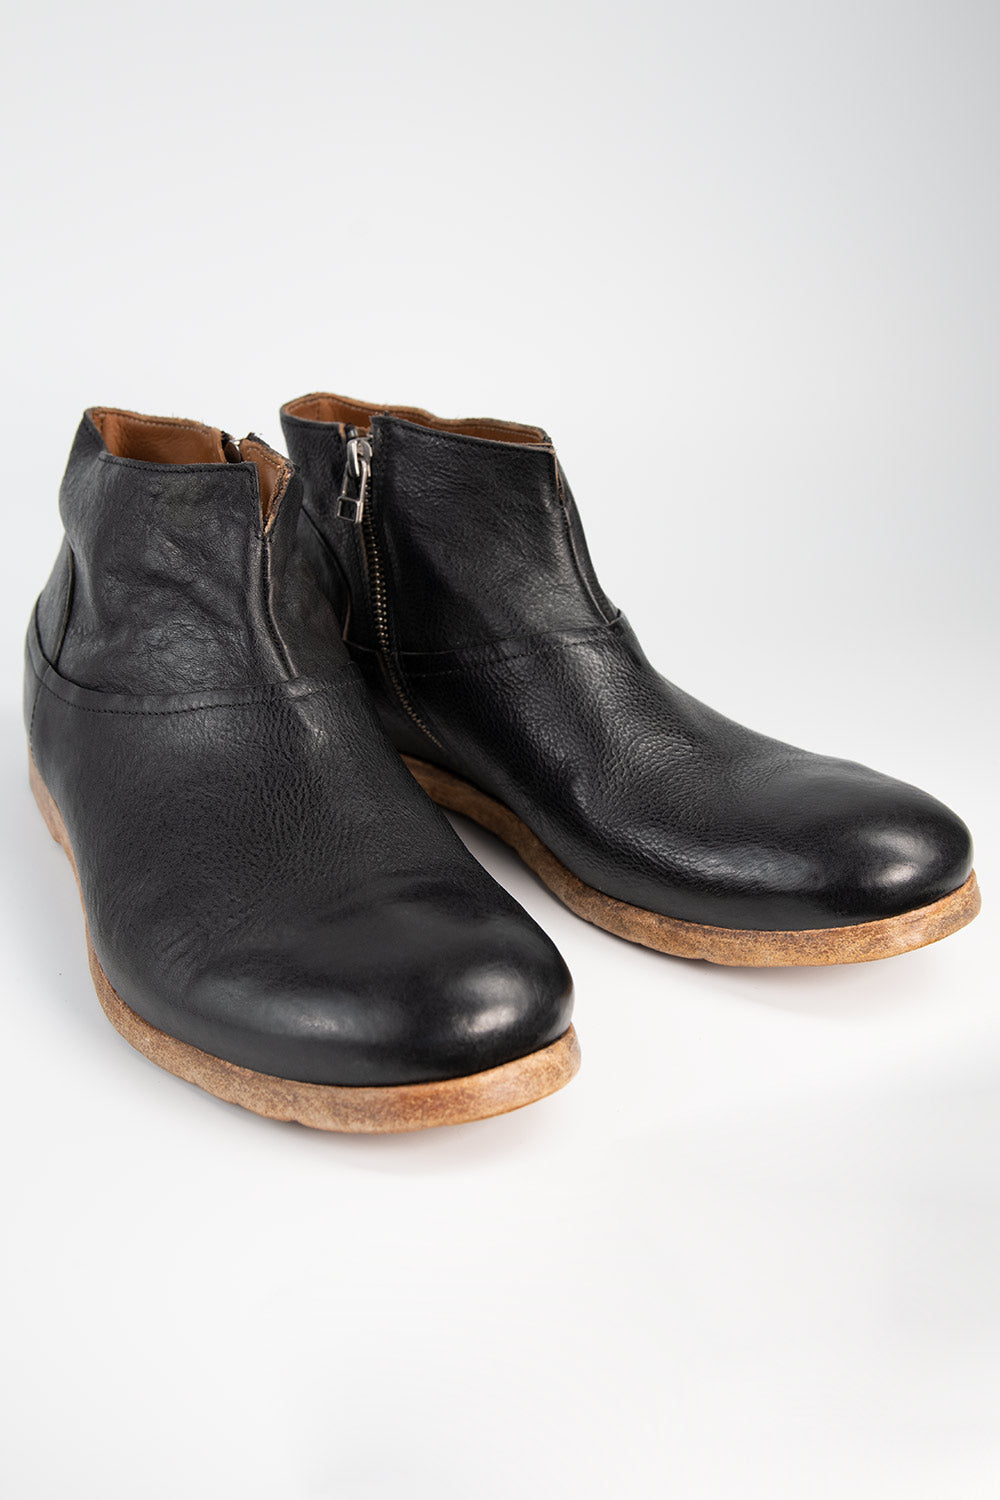 BRUCE rugged-black ankle boots.